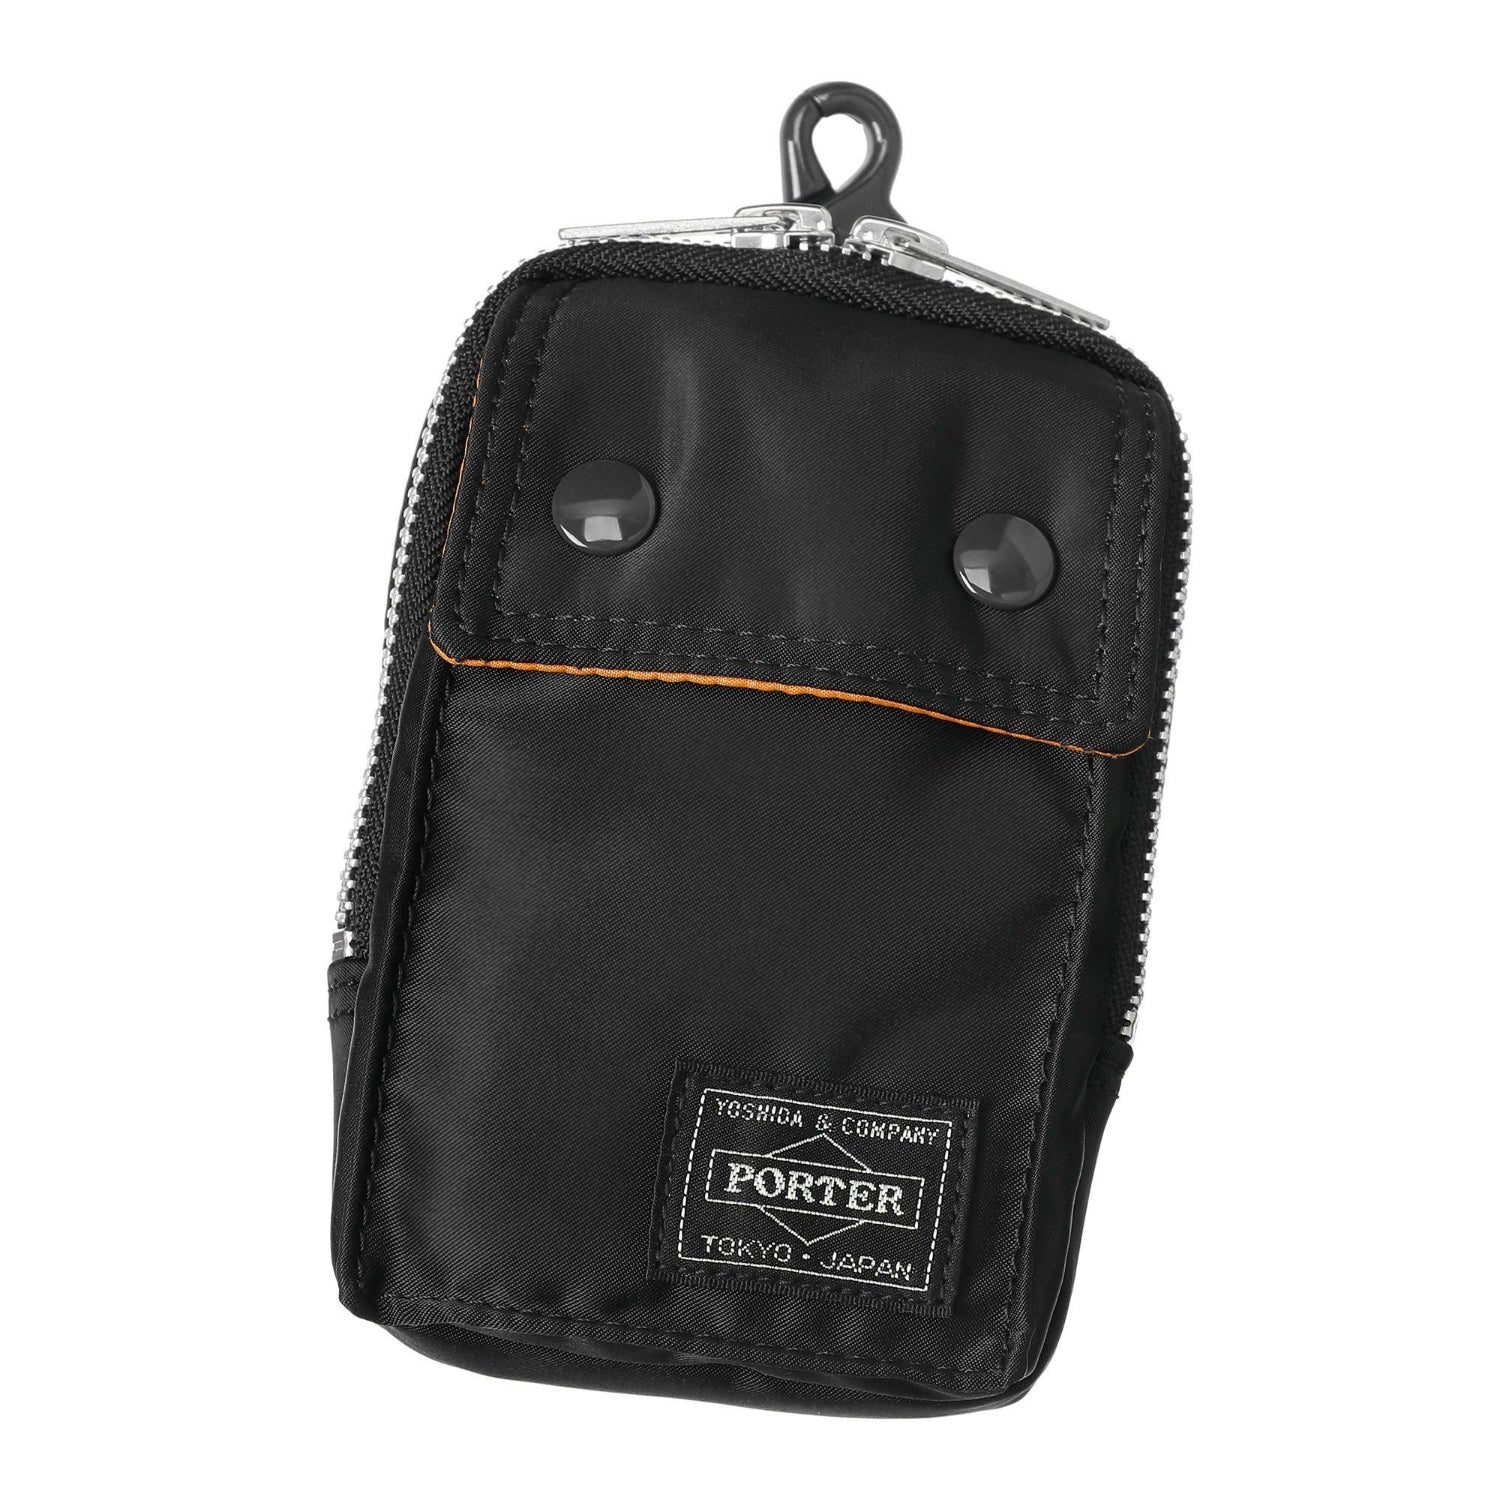 Porter Tanker Pouch Black - BAGS - Canada